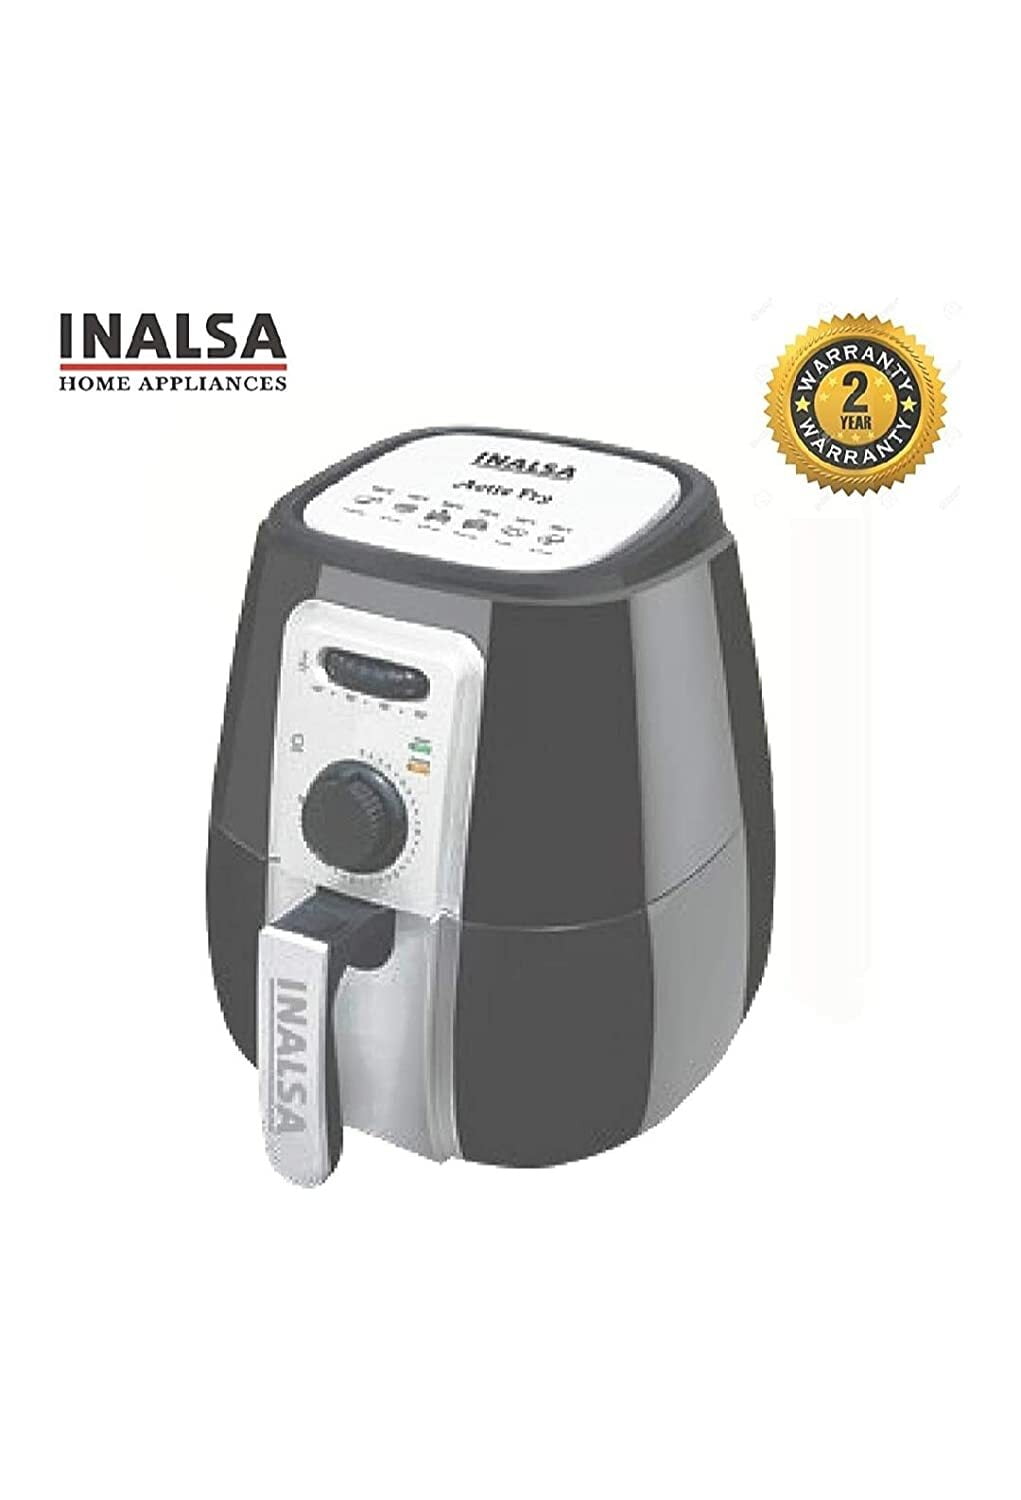 Inalsa Active Fry 4.2 L On Dillimall.Com